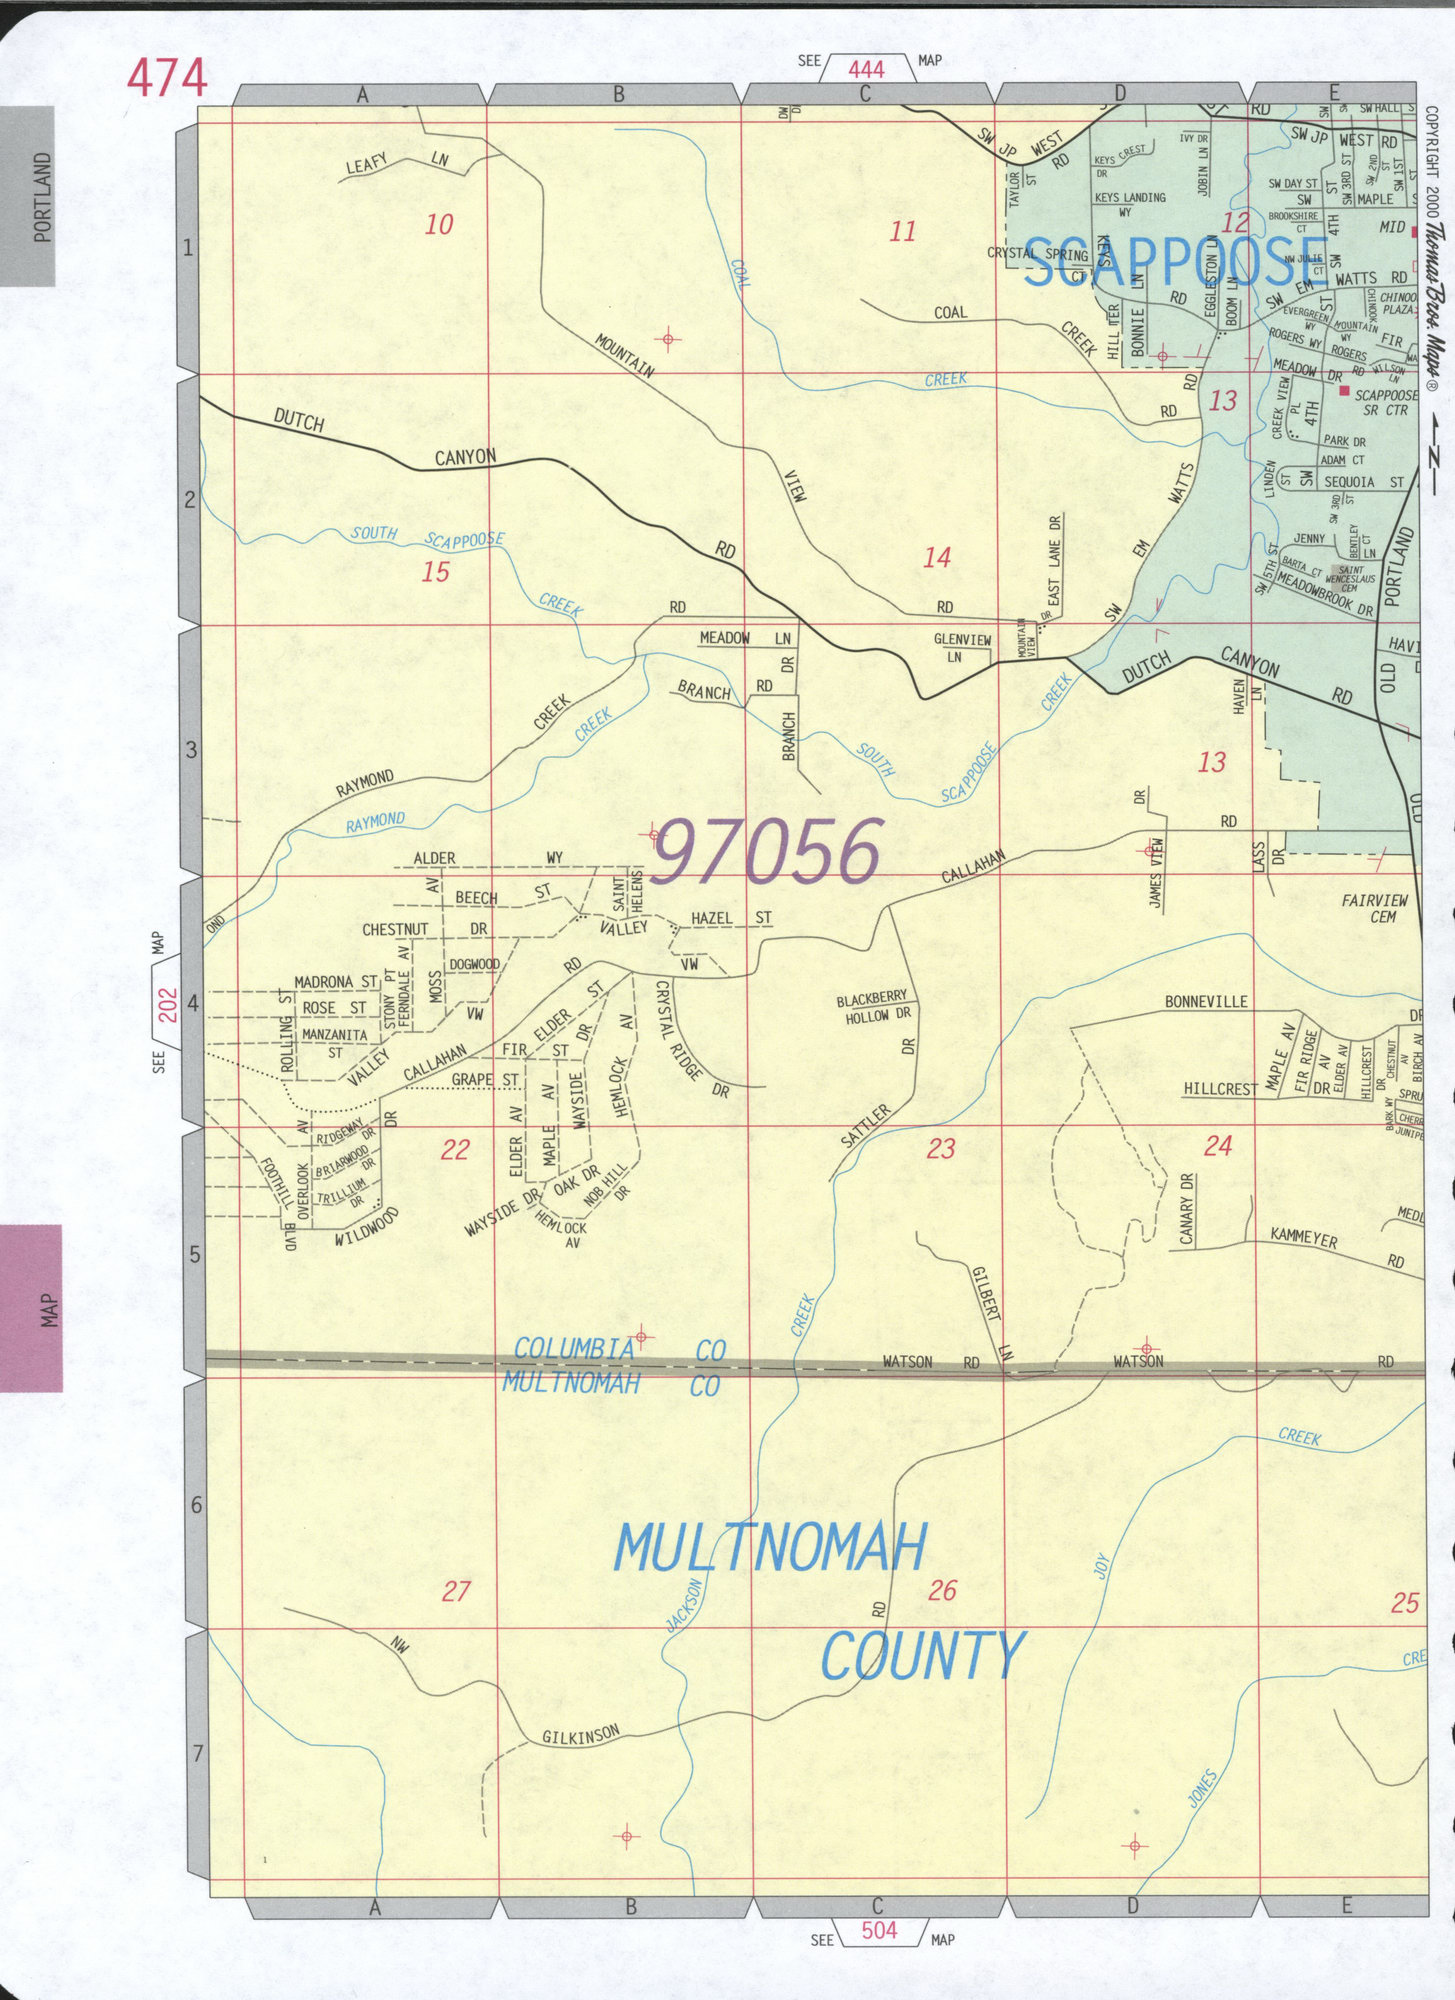 Scappoose city map